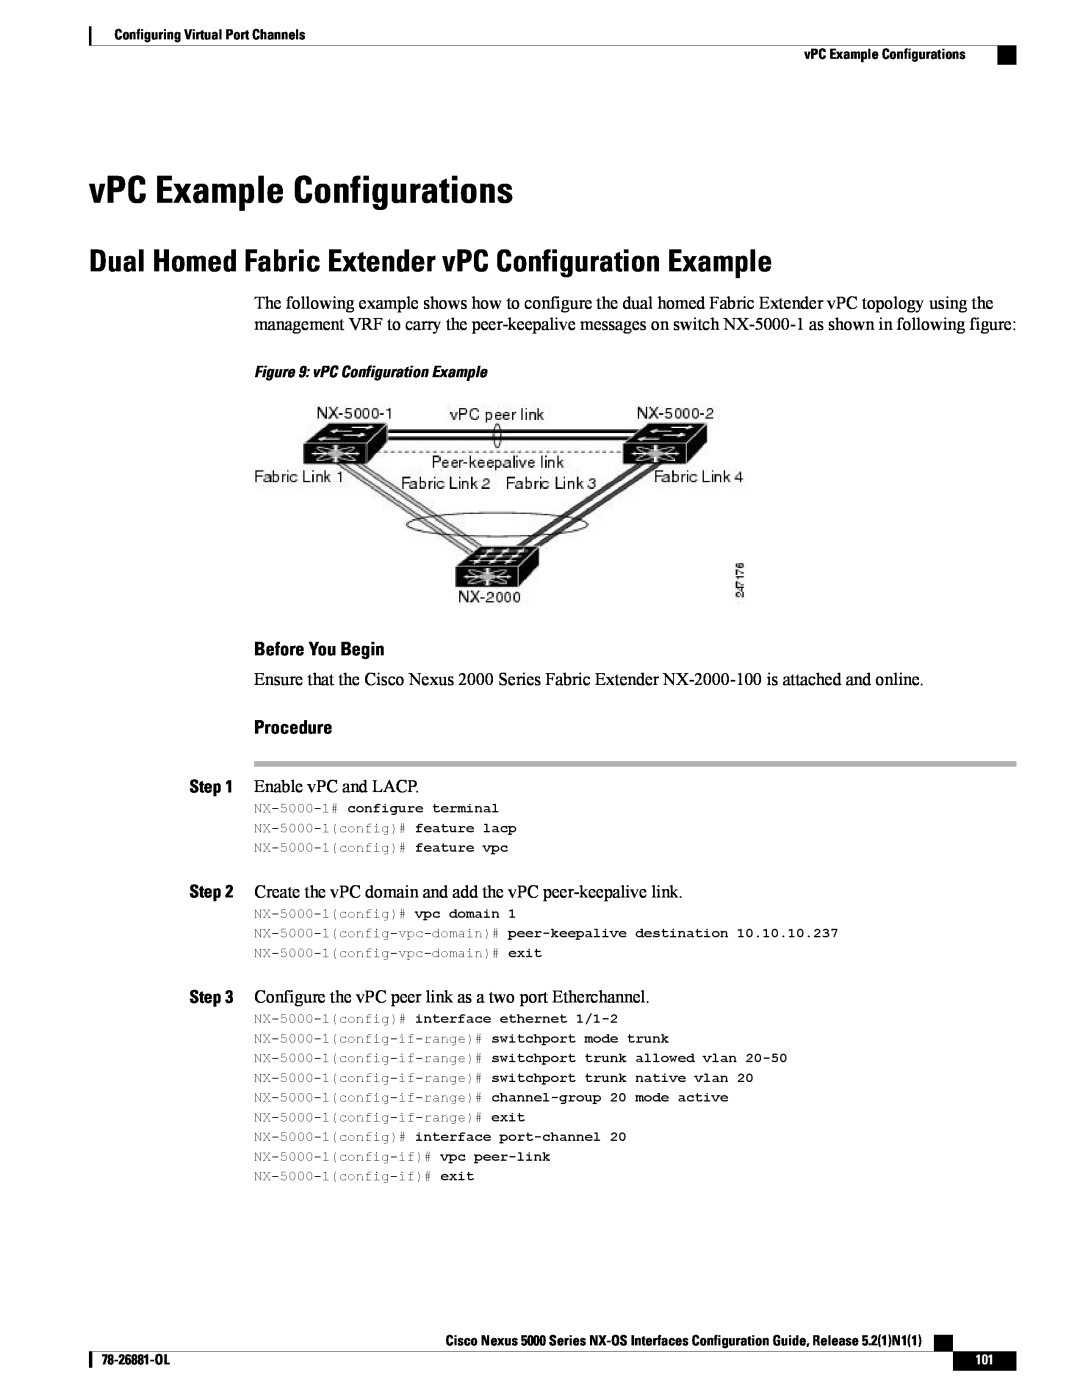 Cisco Systems N5KC5596TFA vPC Example Configurations, Dual Homed Fabric Extender vPC Configuration Example, Procedure 